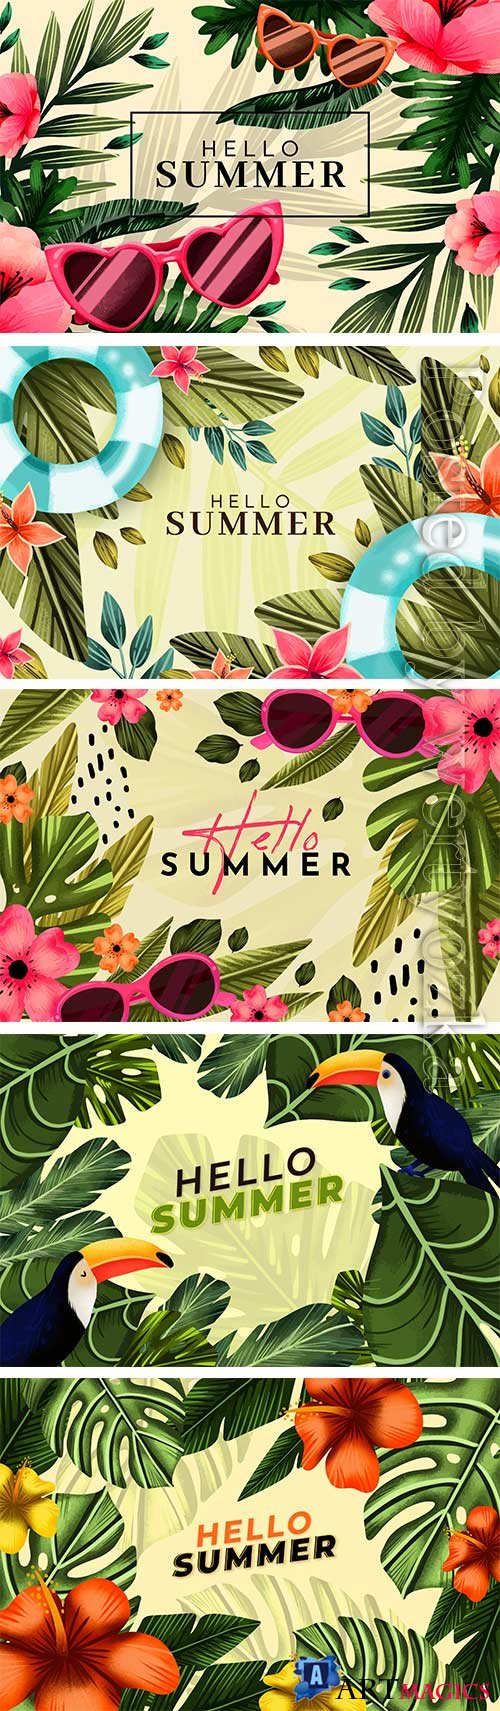 Hello summer hand painted watercolor illustration